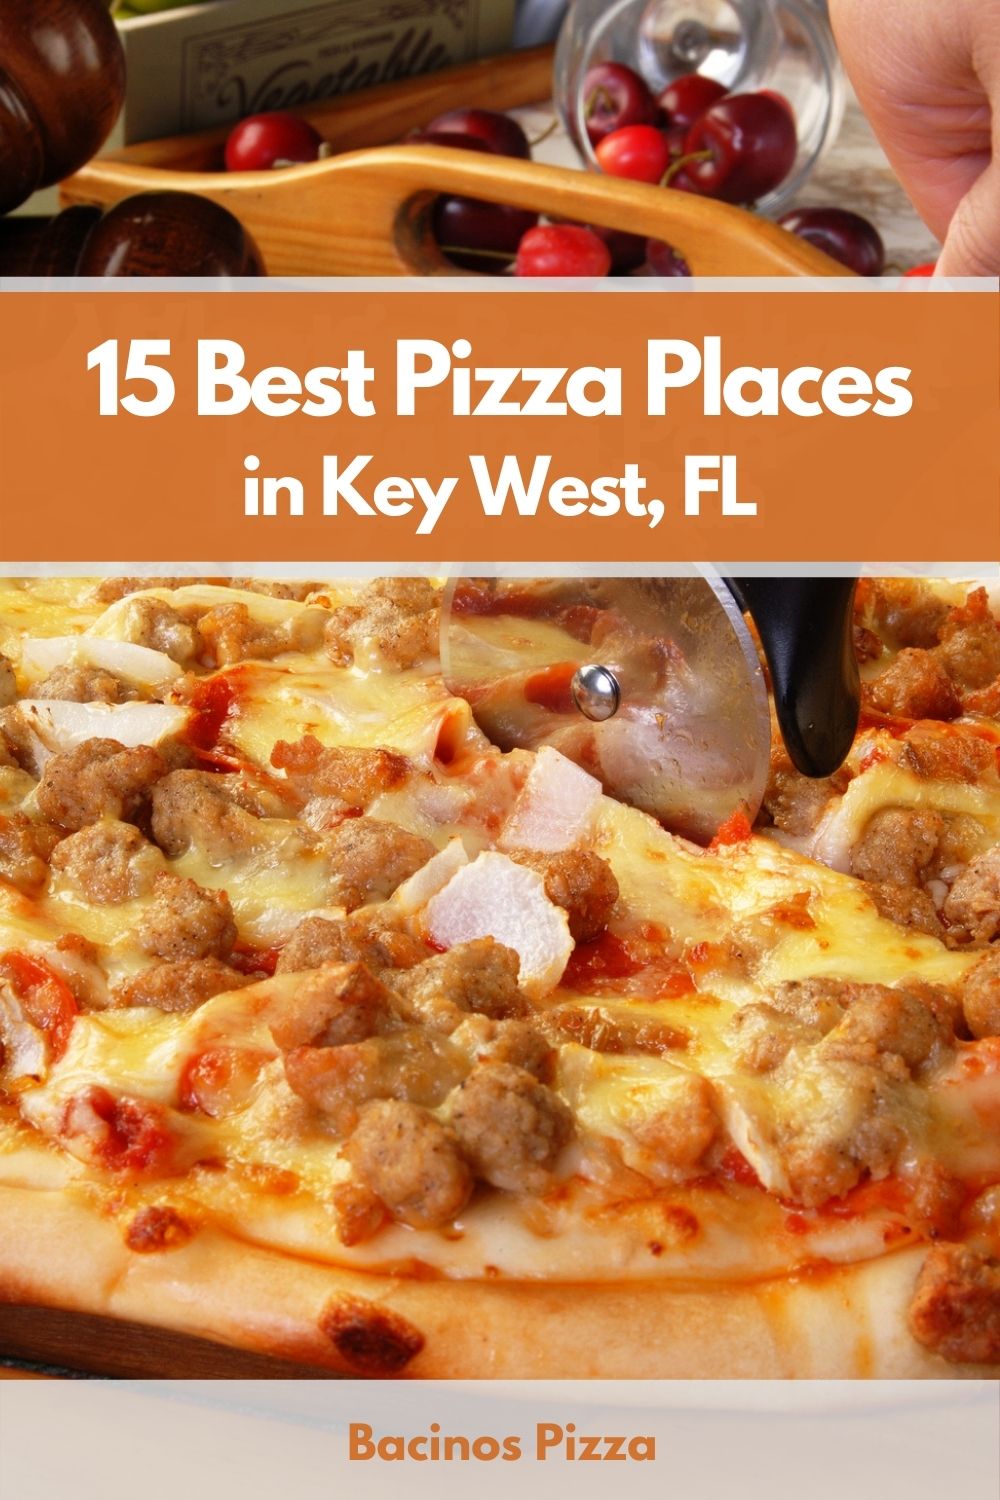 15 Best Pizza Places in Key West, FL pin